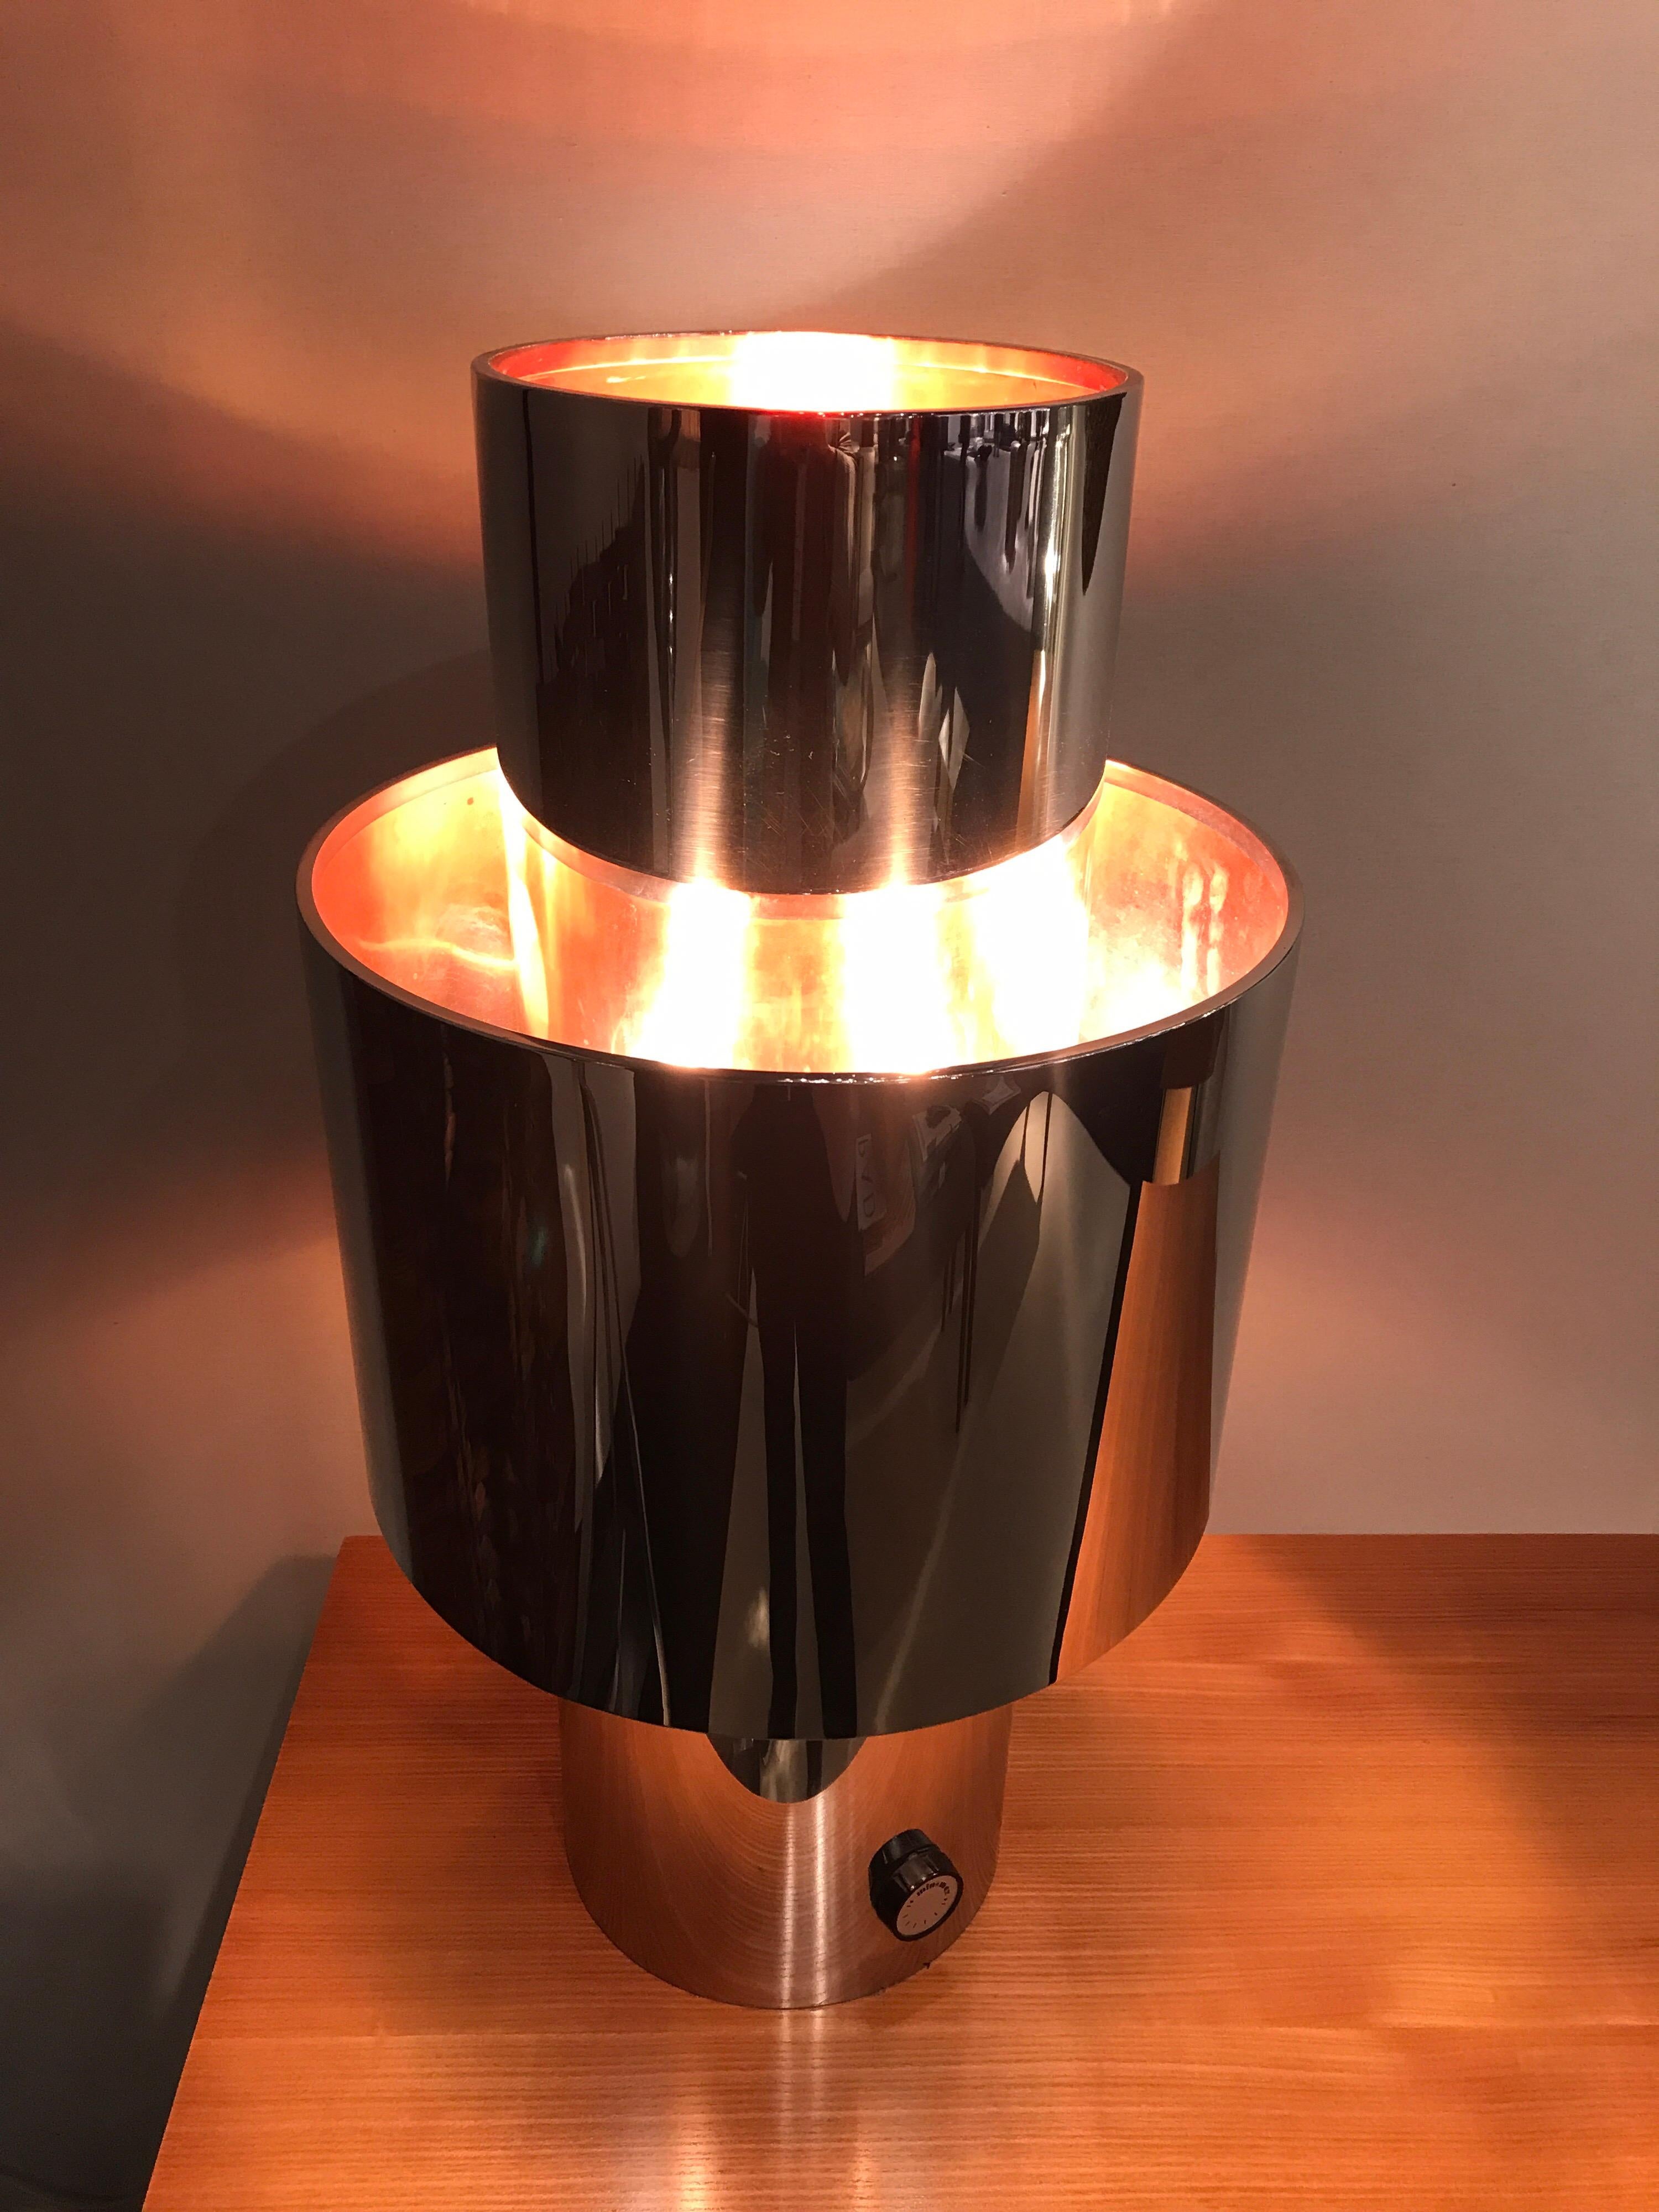 1970s chrome table lamp . Designed By Willy Rizzo
Shade interior is on cooper.
Gréât vintage condition 
Off/On dimes on working condition.